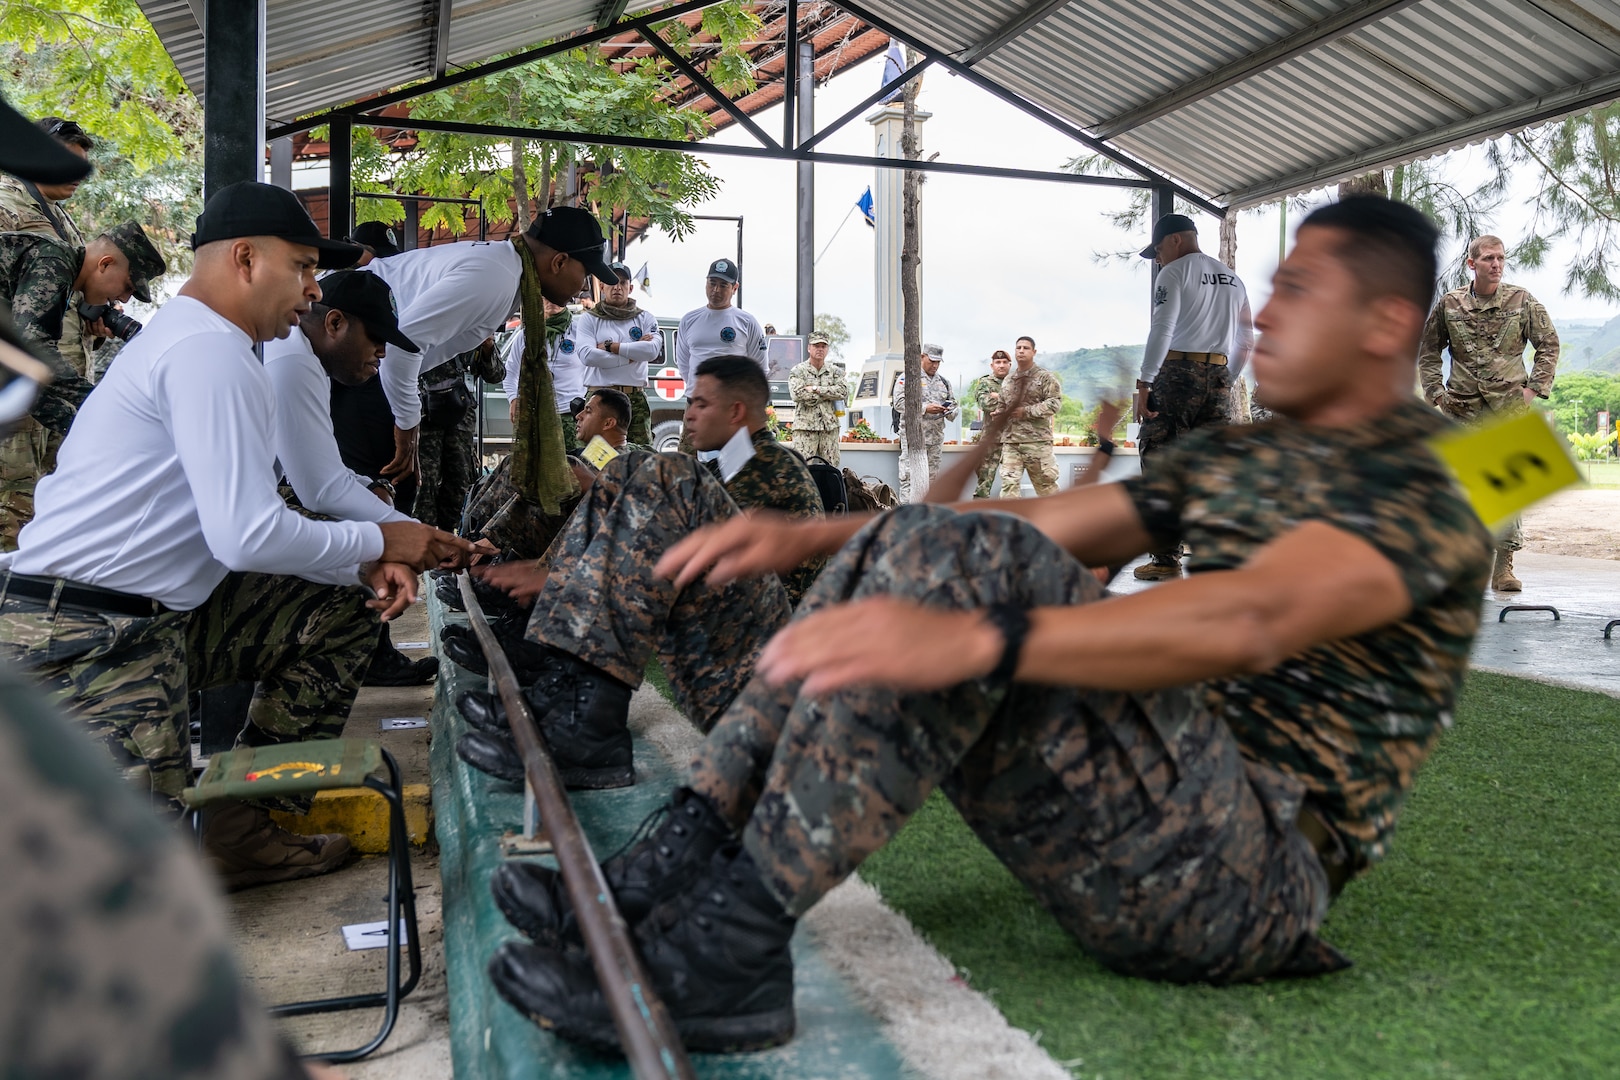 Guatemala team members perform the situp portion of the Physical Training Test as part of the first event for Fuerzas Comando 2022, on June 13, 2022, in Tegucigalpa, Honduras.